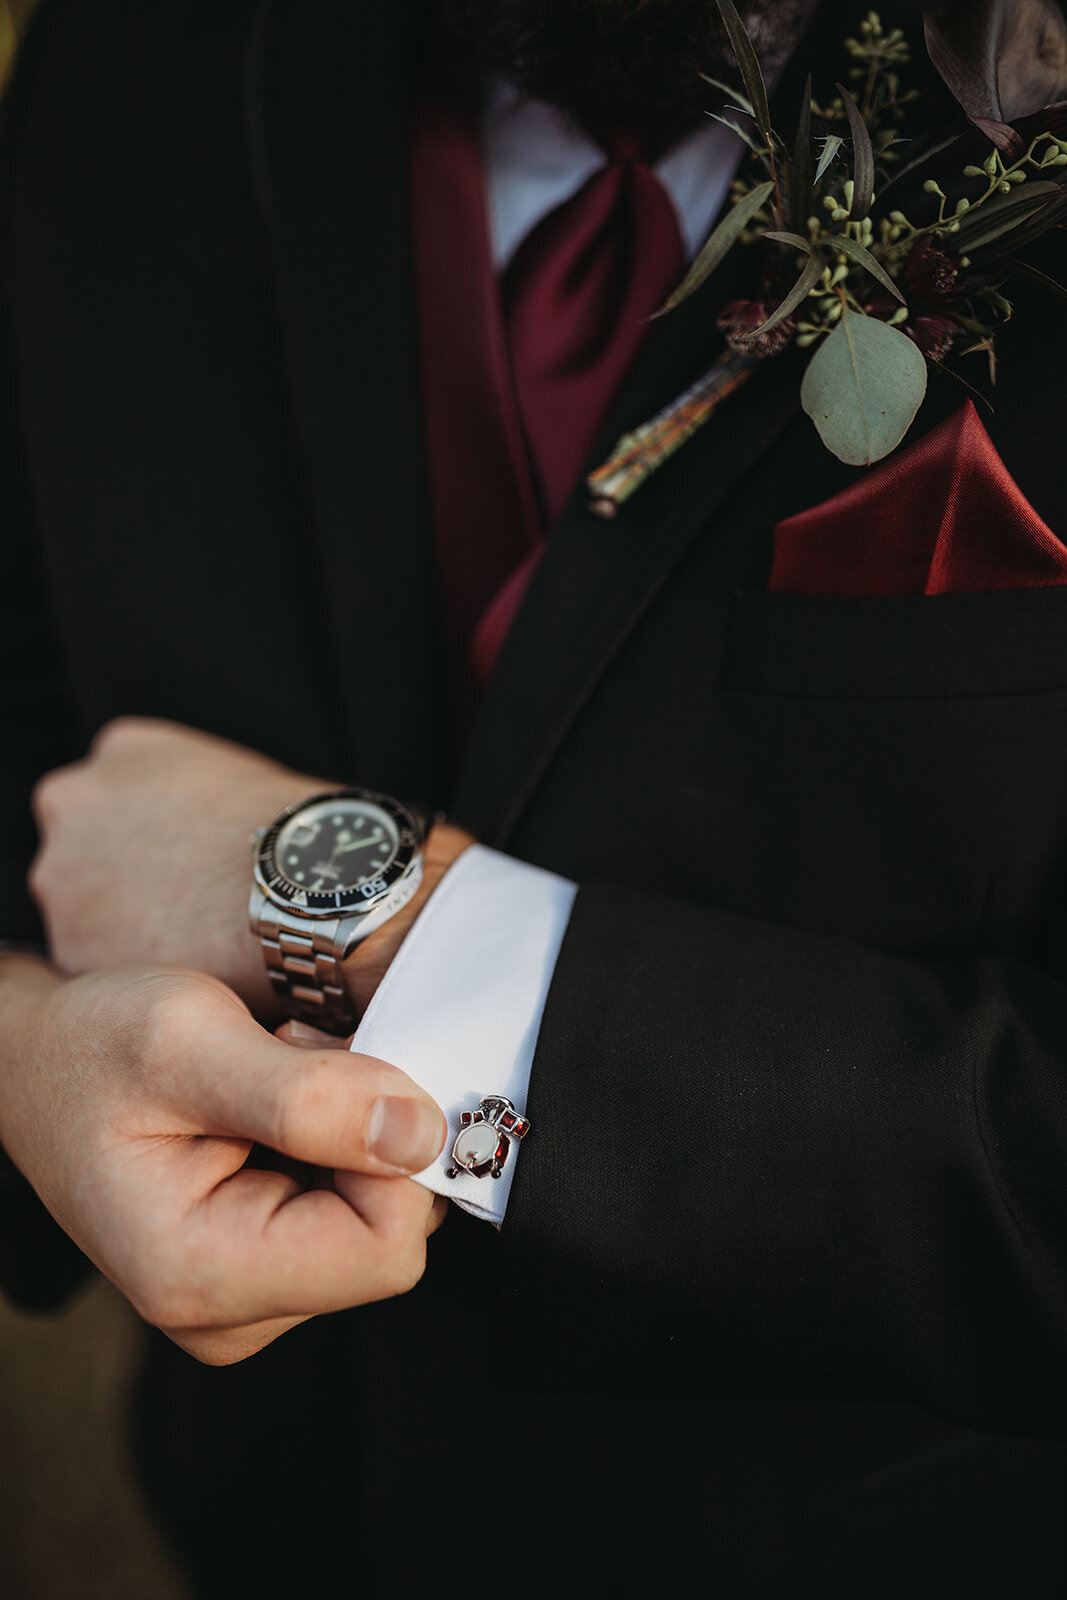 Detail of a groom's black suit, showing a drum set cufflink and a hand adjusting the cuff, with a maroon tie and boutonniere